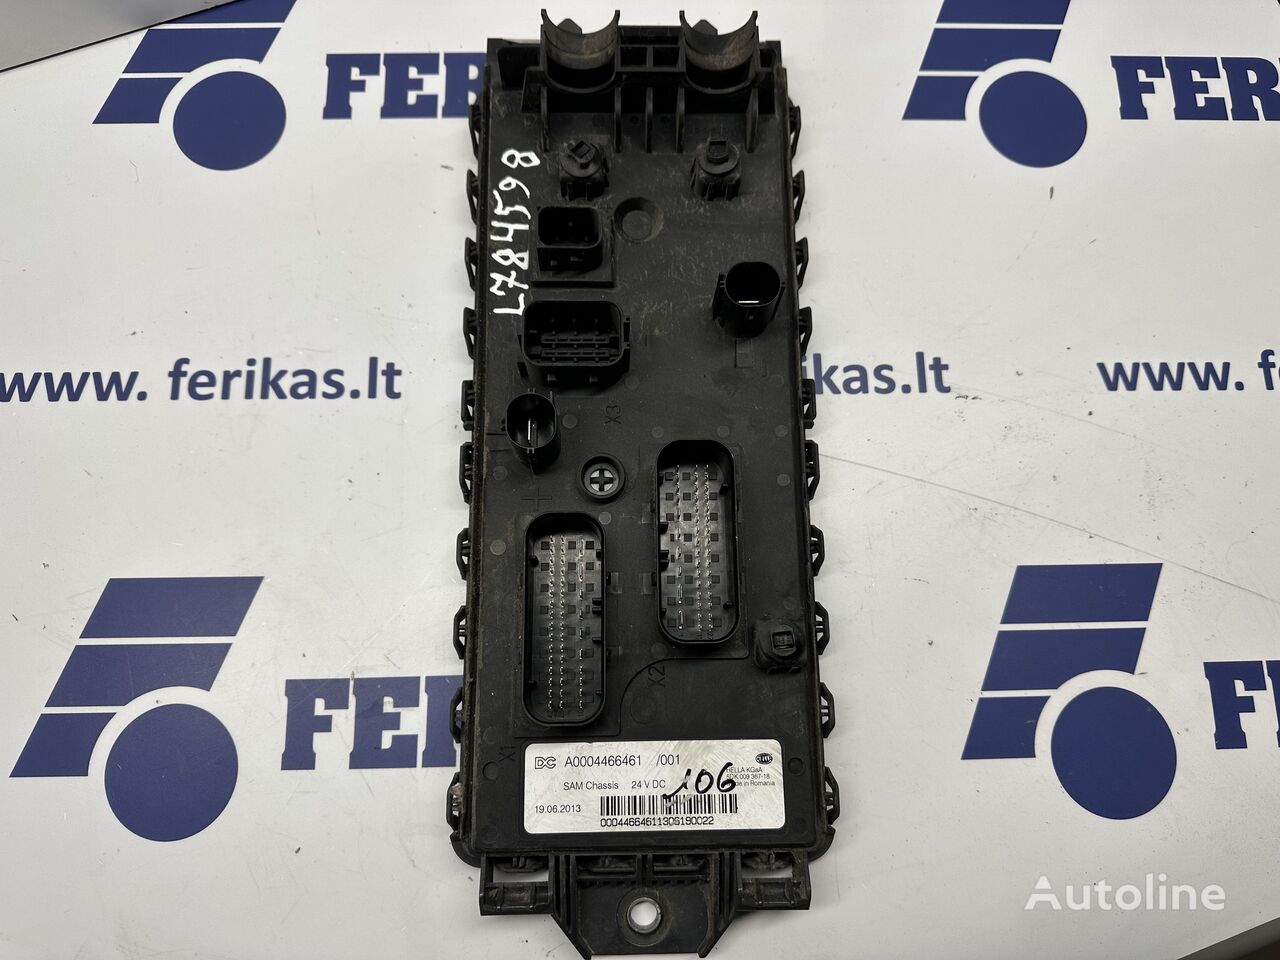 Mercedes-Benz Chassis control unit A0004466461 styreenhet for Mercedes-Benz Actros MP4 SAM Chassis trekkvogn